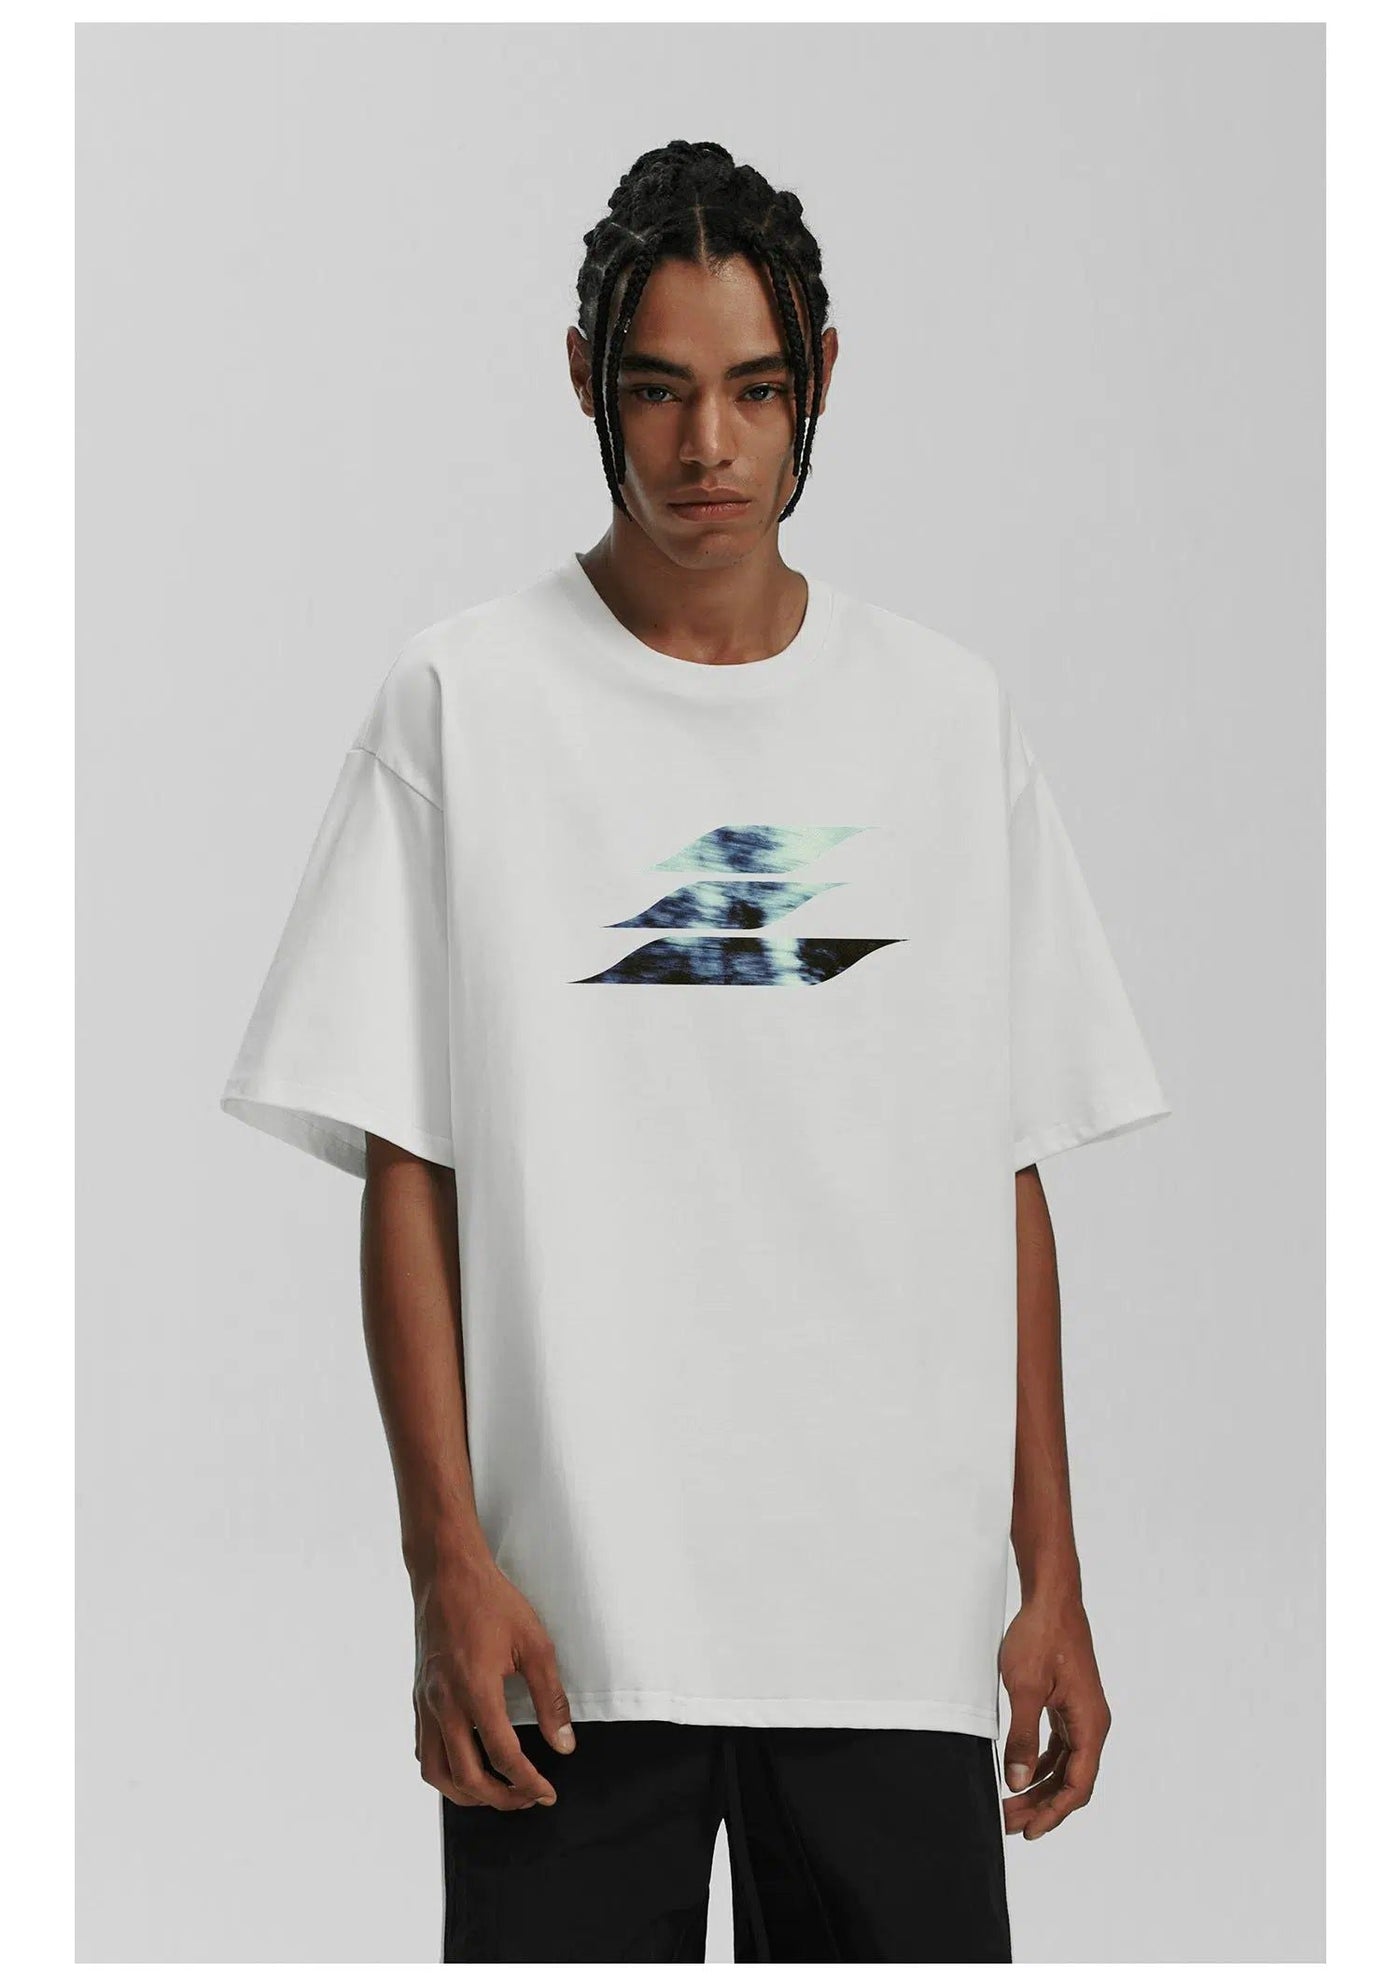 Abstract Graphic Logo T-Shirt Korean Street Fashion T-Shirt By Lost CTRL Shop Online at OH Vault